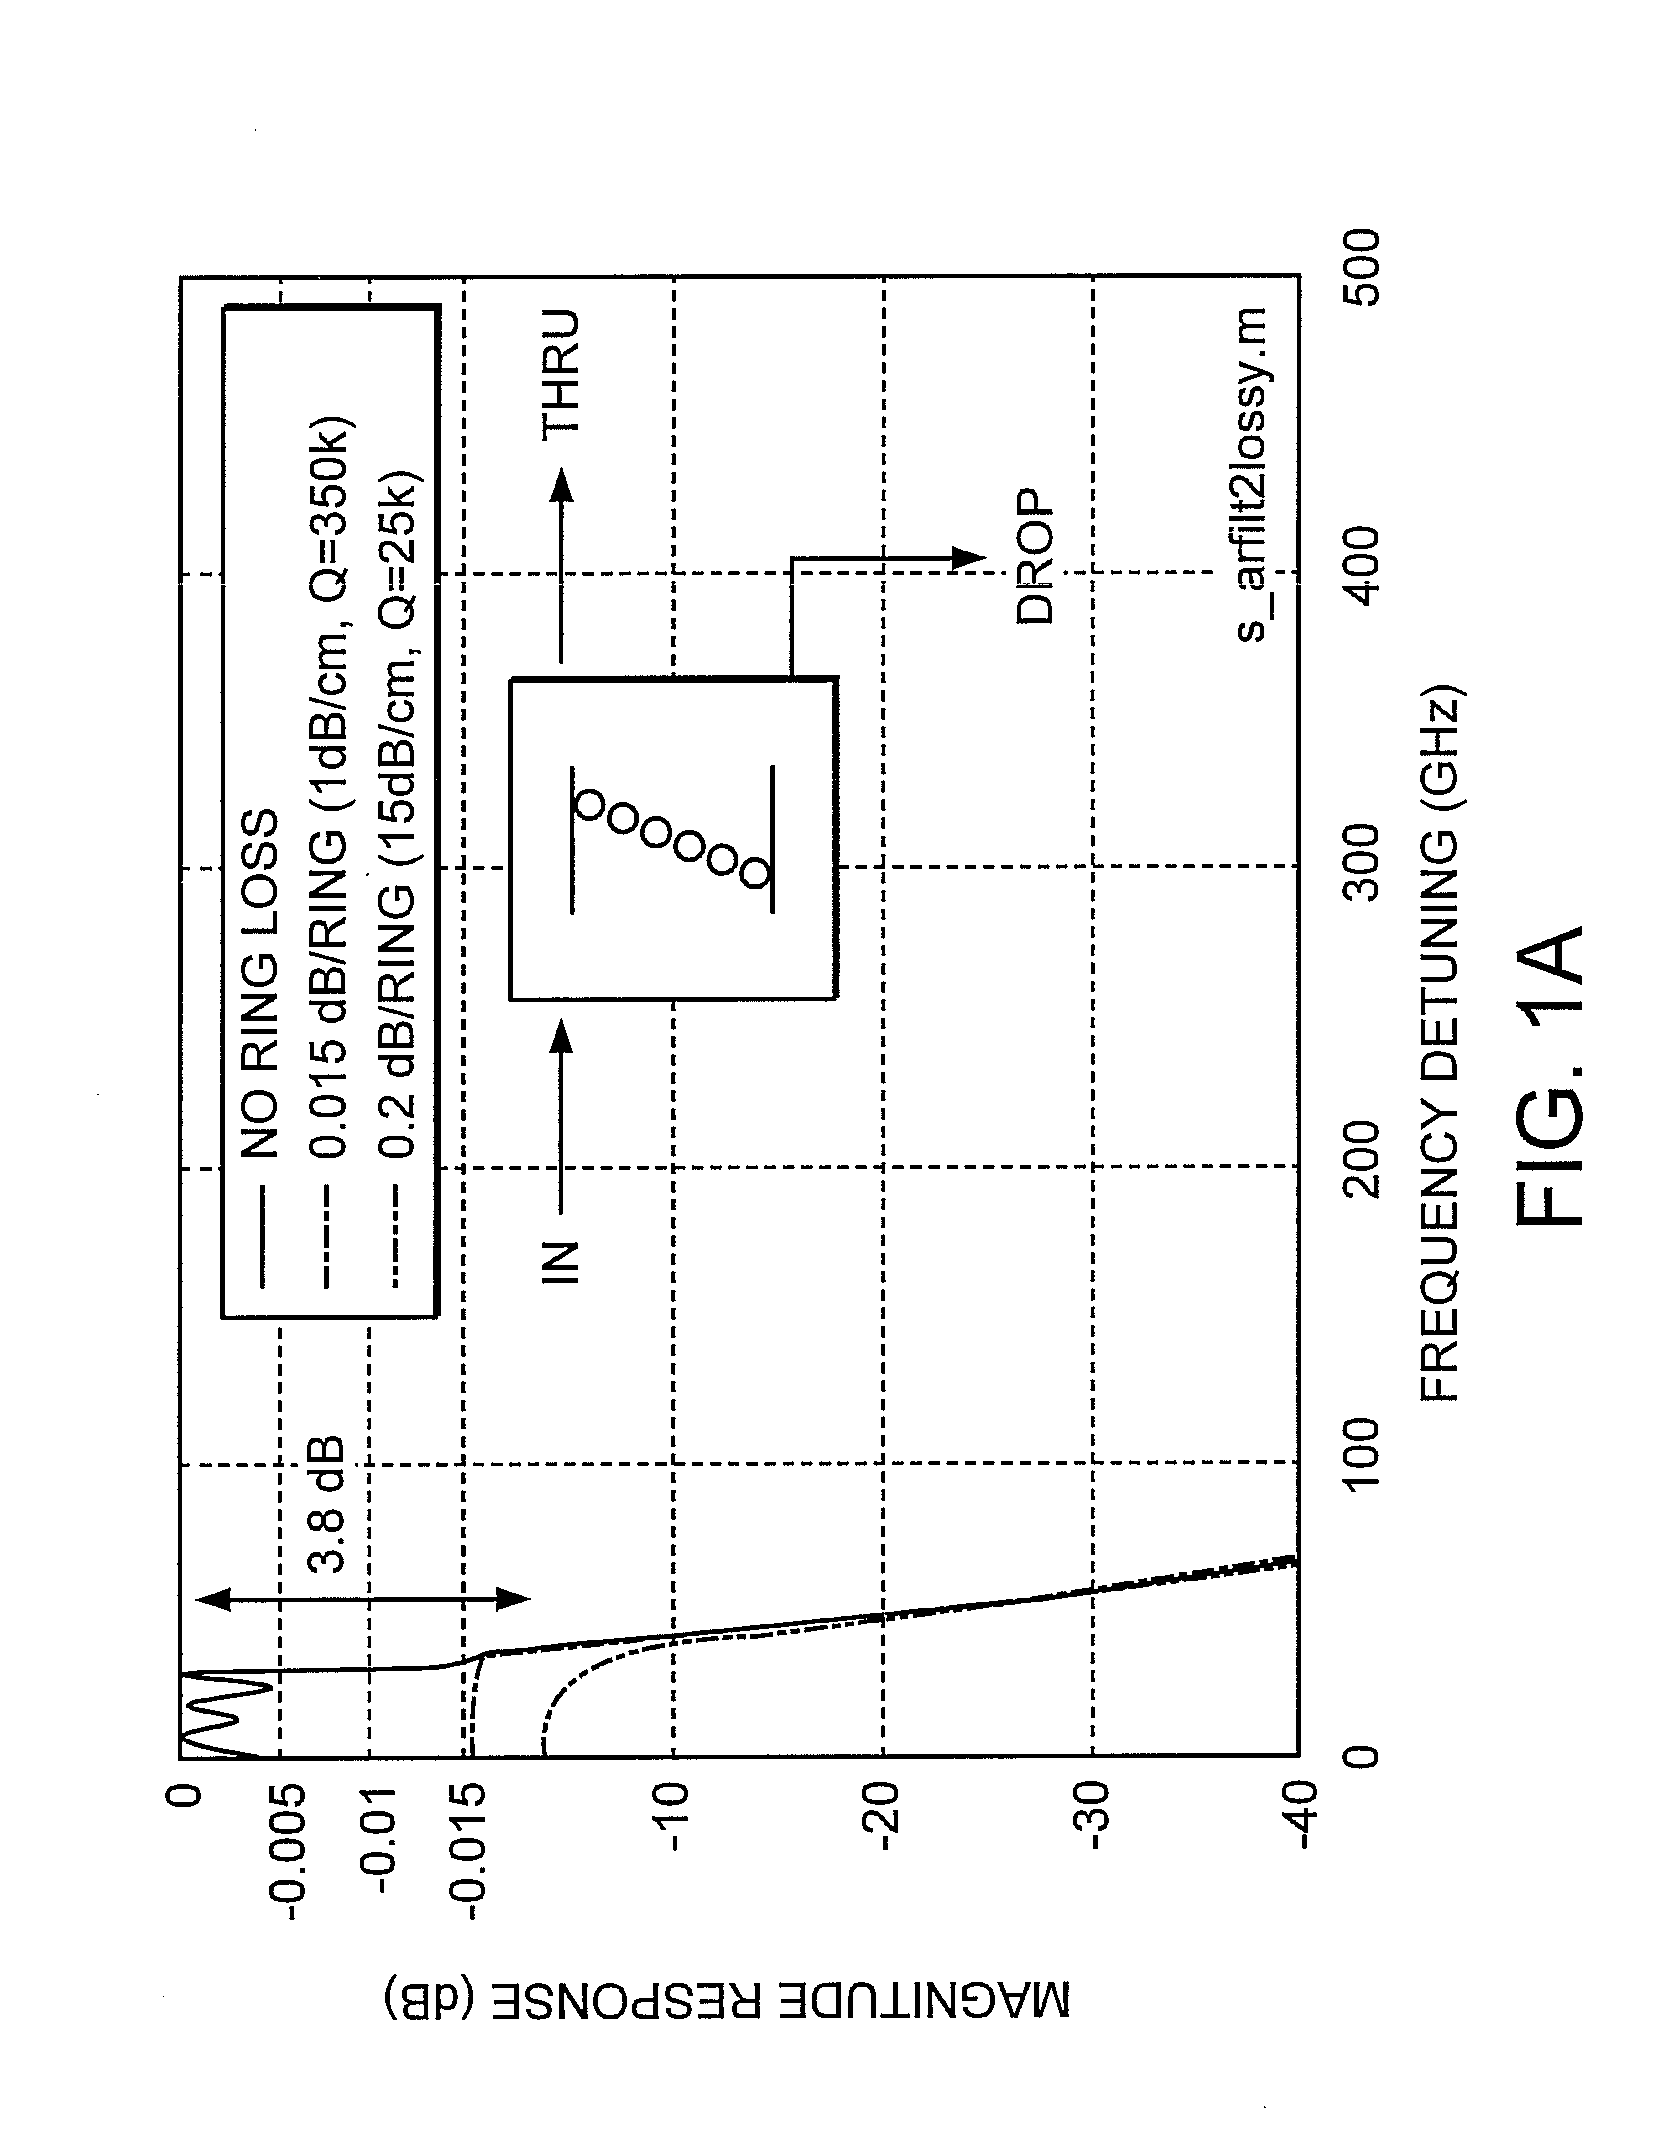 Optical coupled-resonator filters with asymmetric coupling